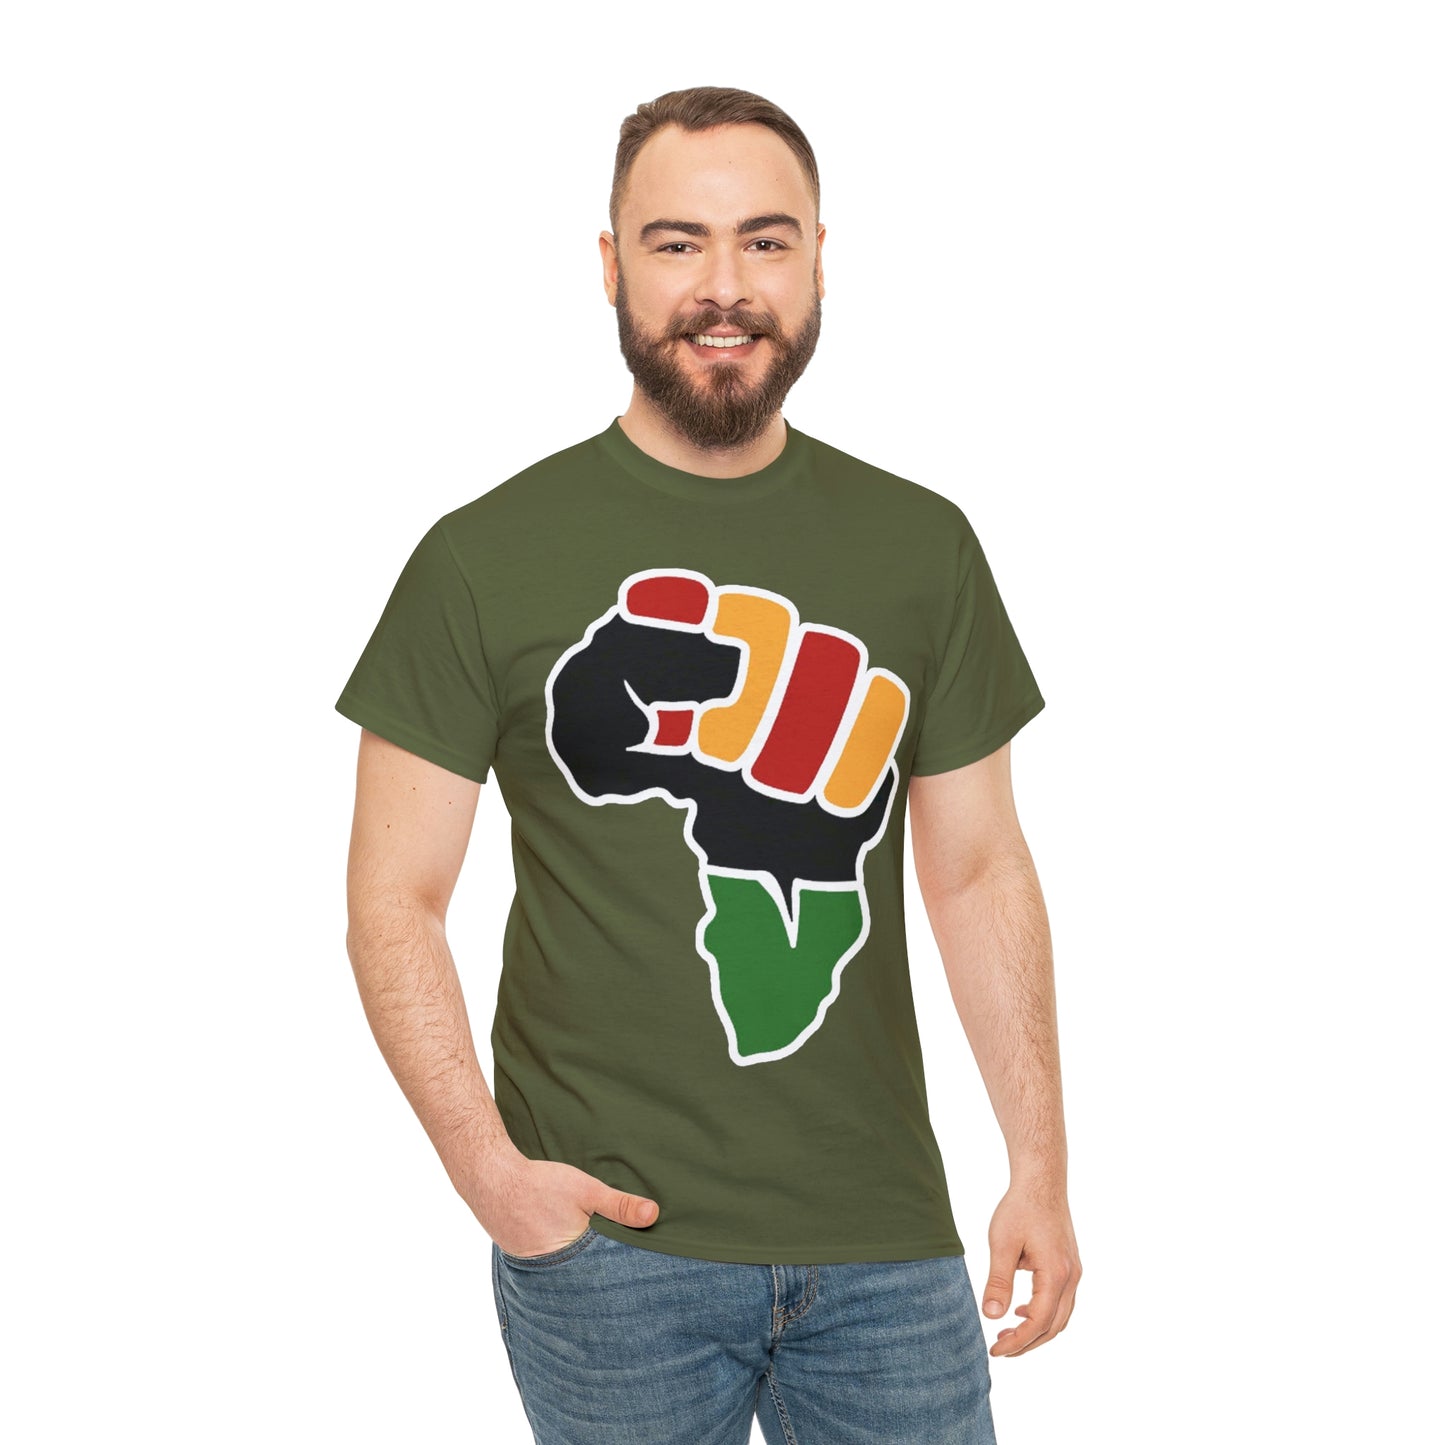 African Fist Shirt Up to 5X